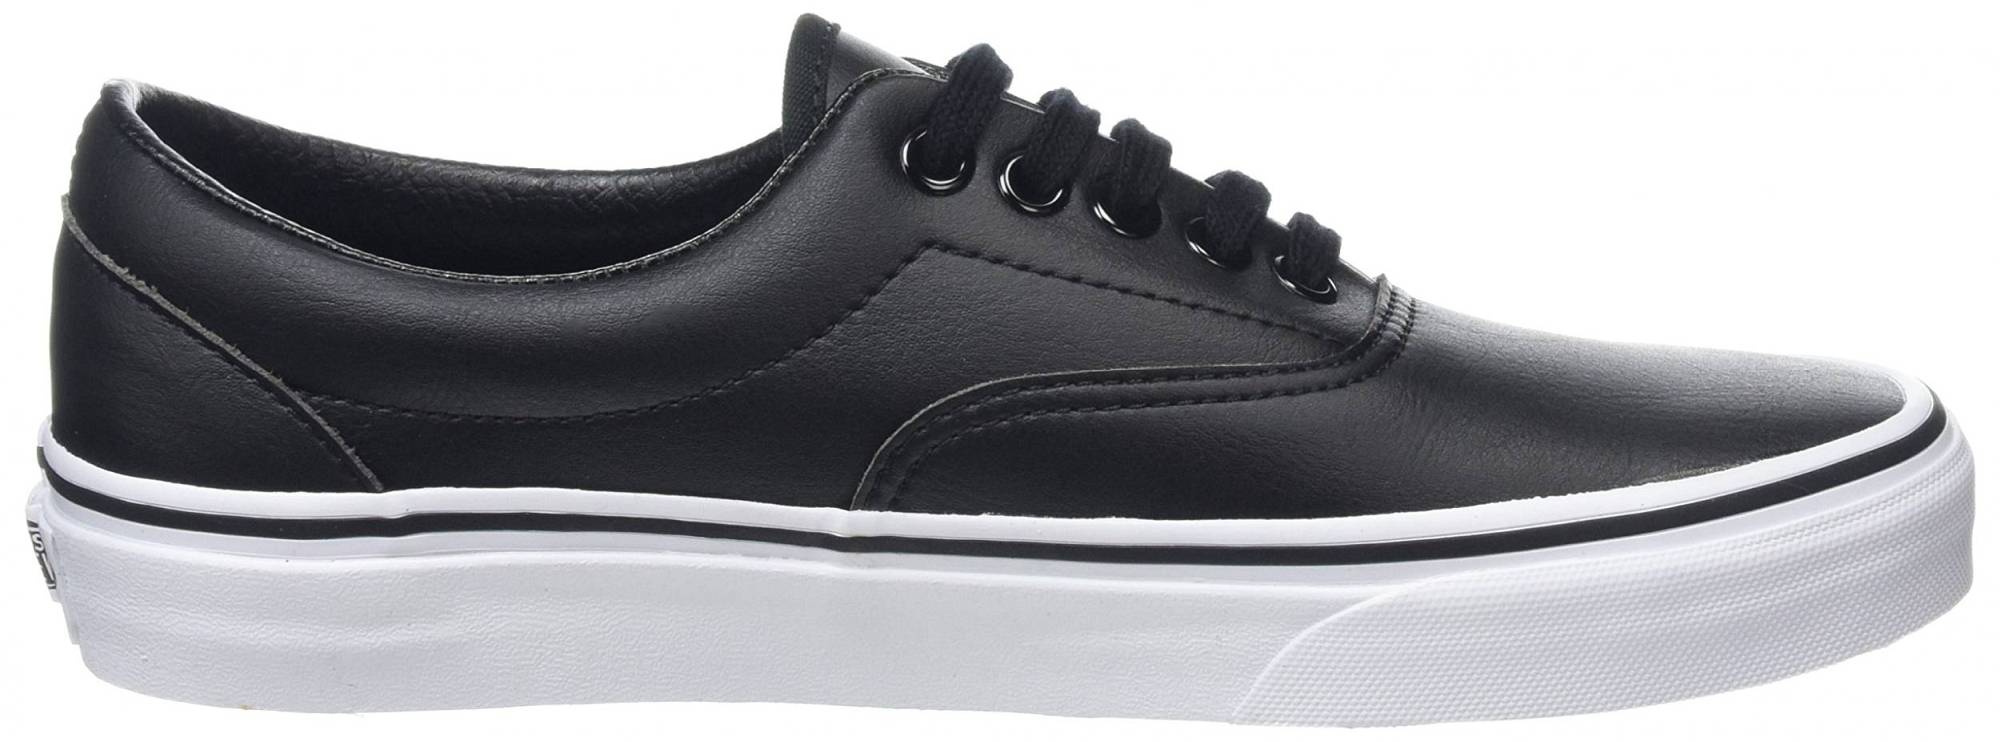 Vans Classic Tumble – Shoes Reviews & Reasons To Buy